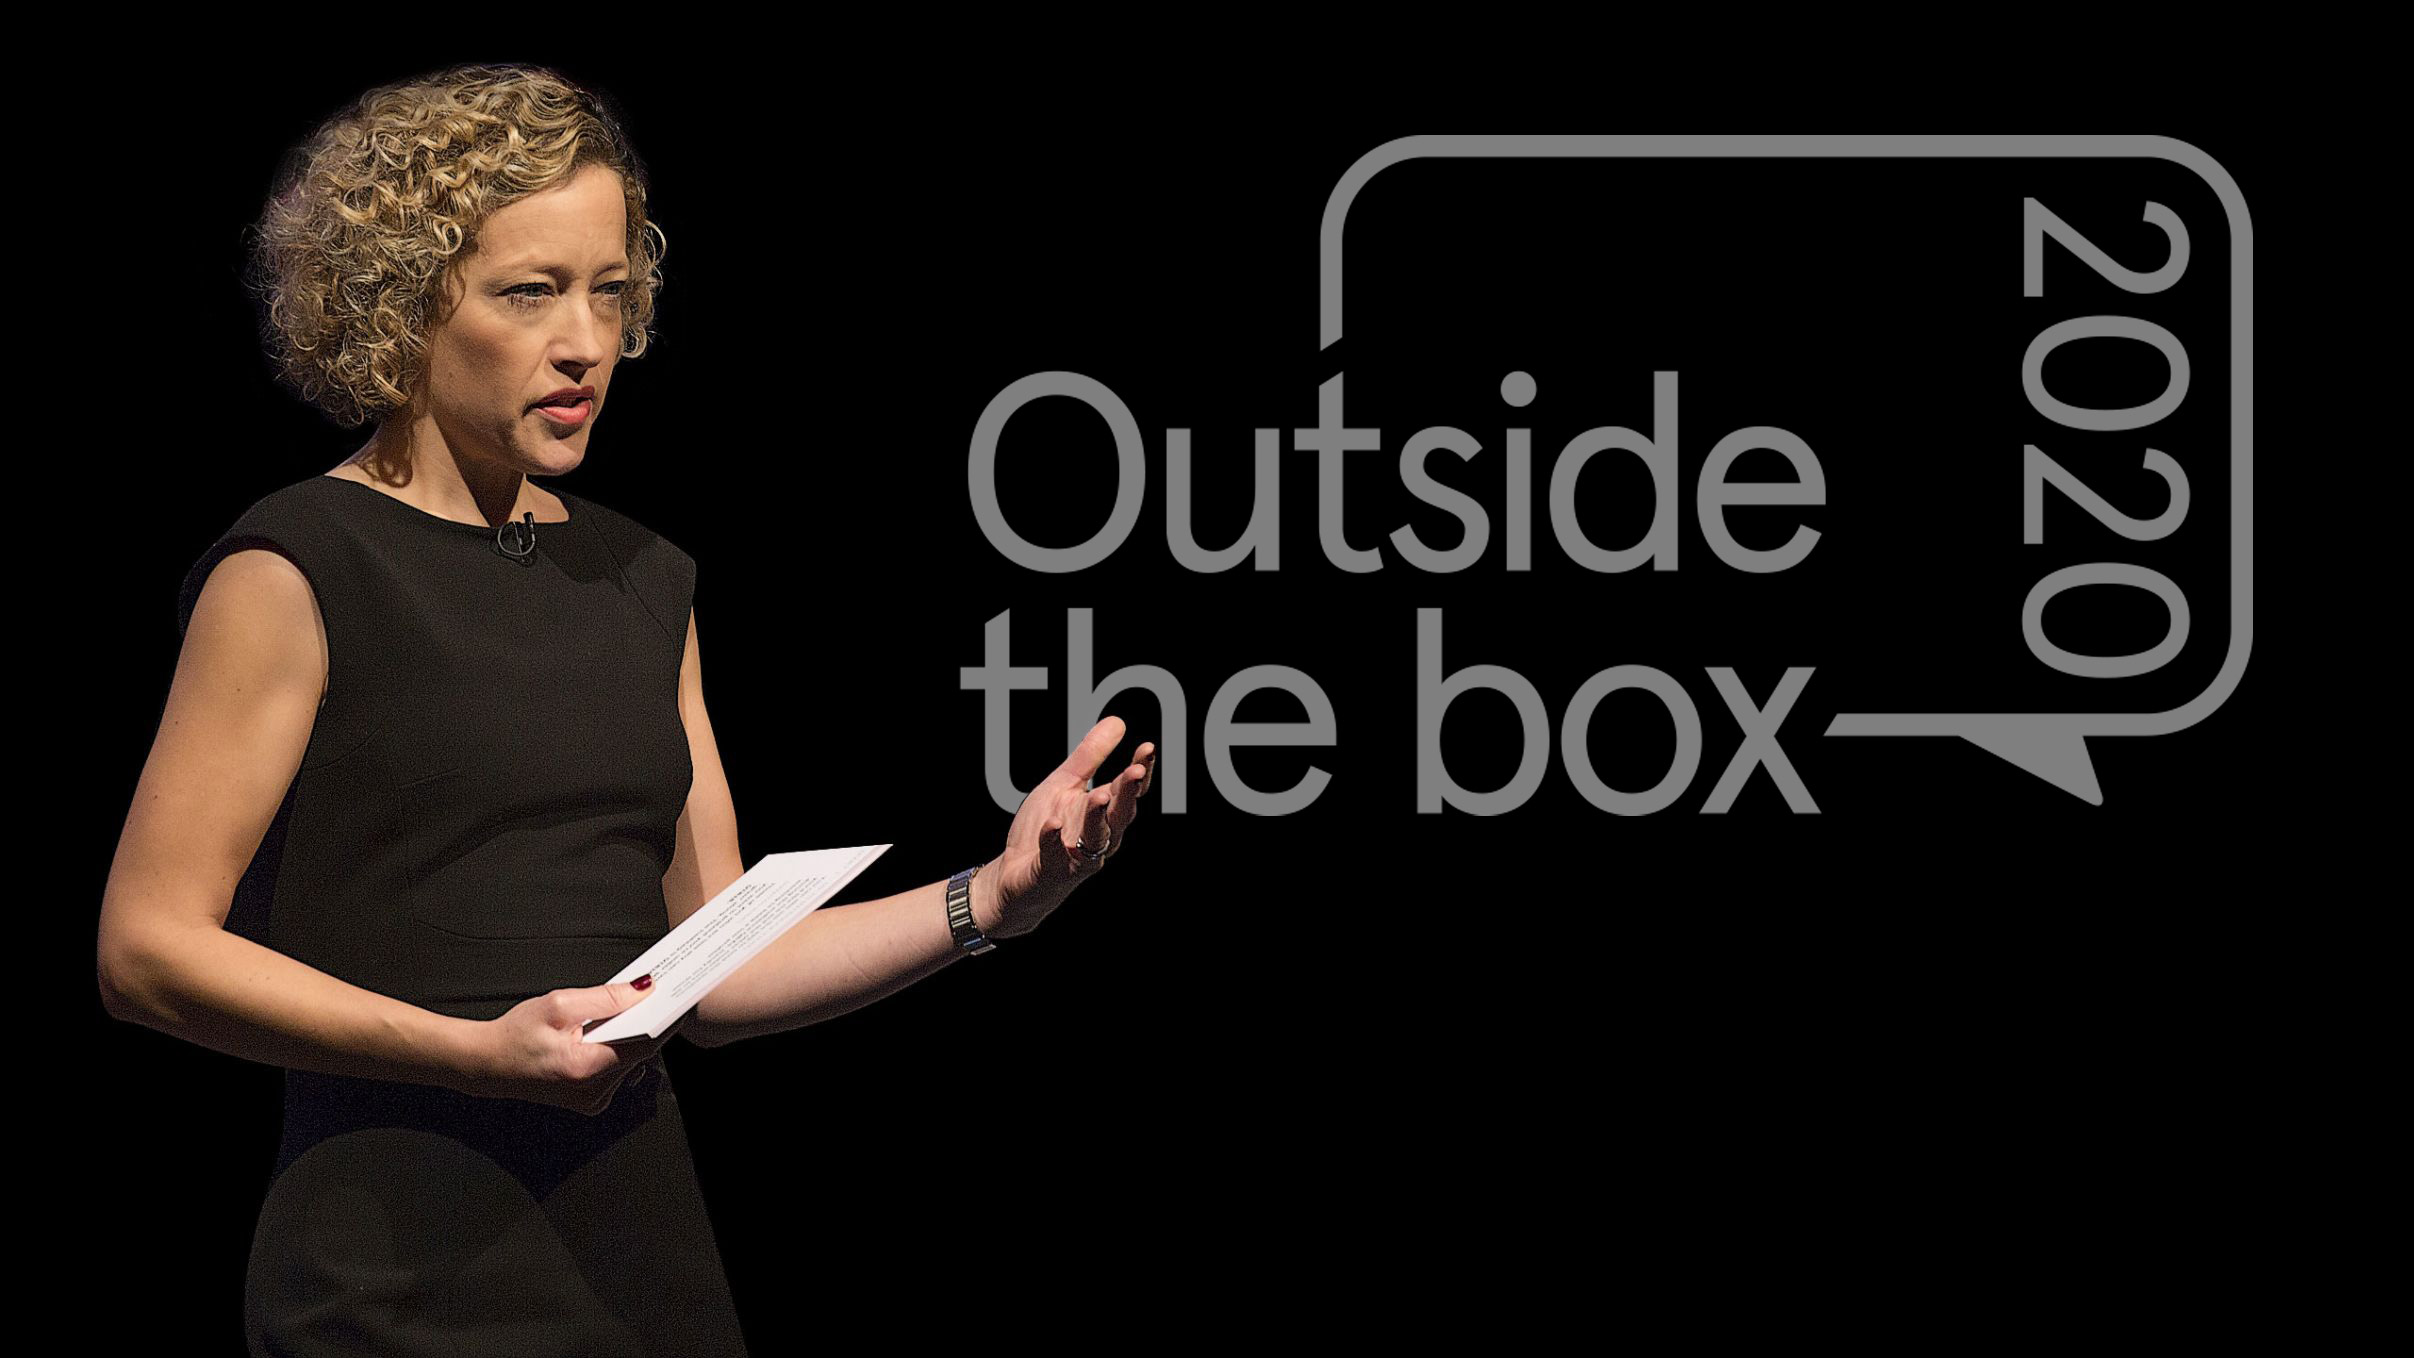 Cathy Newman presents Outside the box 2020